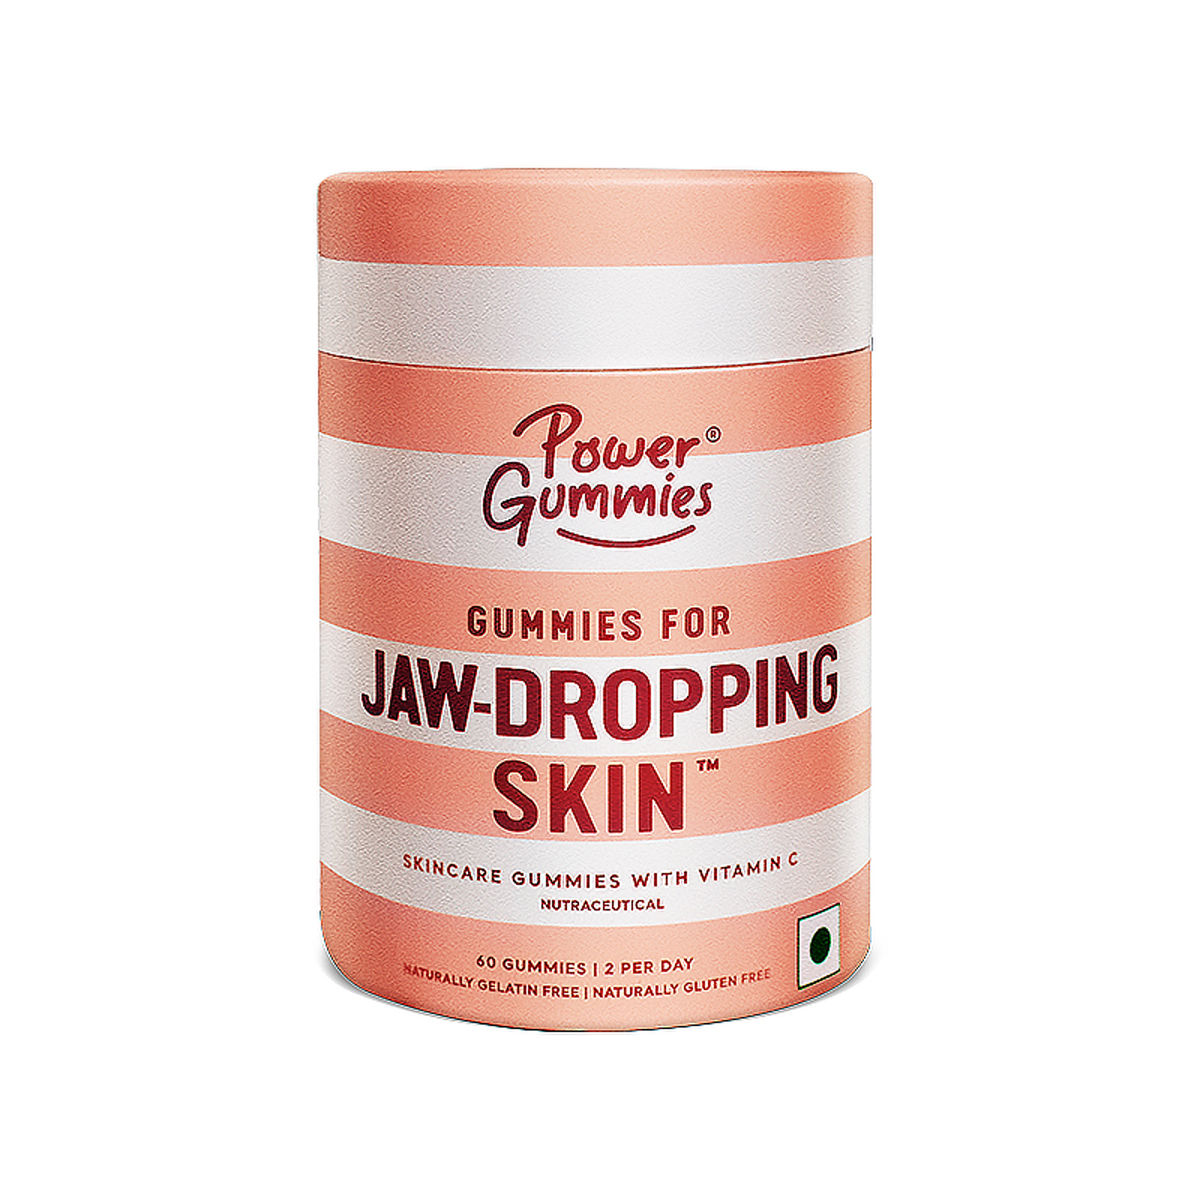 Buy Power Gummies Jaw Dropping Skincare Gummies with Vitamin C Lemon Twist Flavour, 60 Count Online